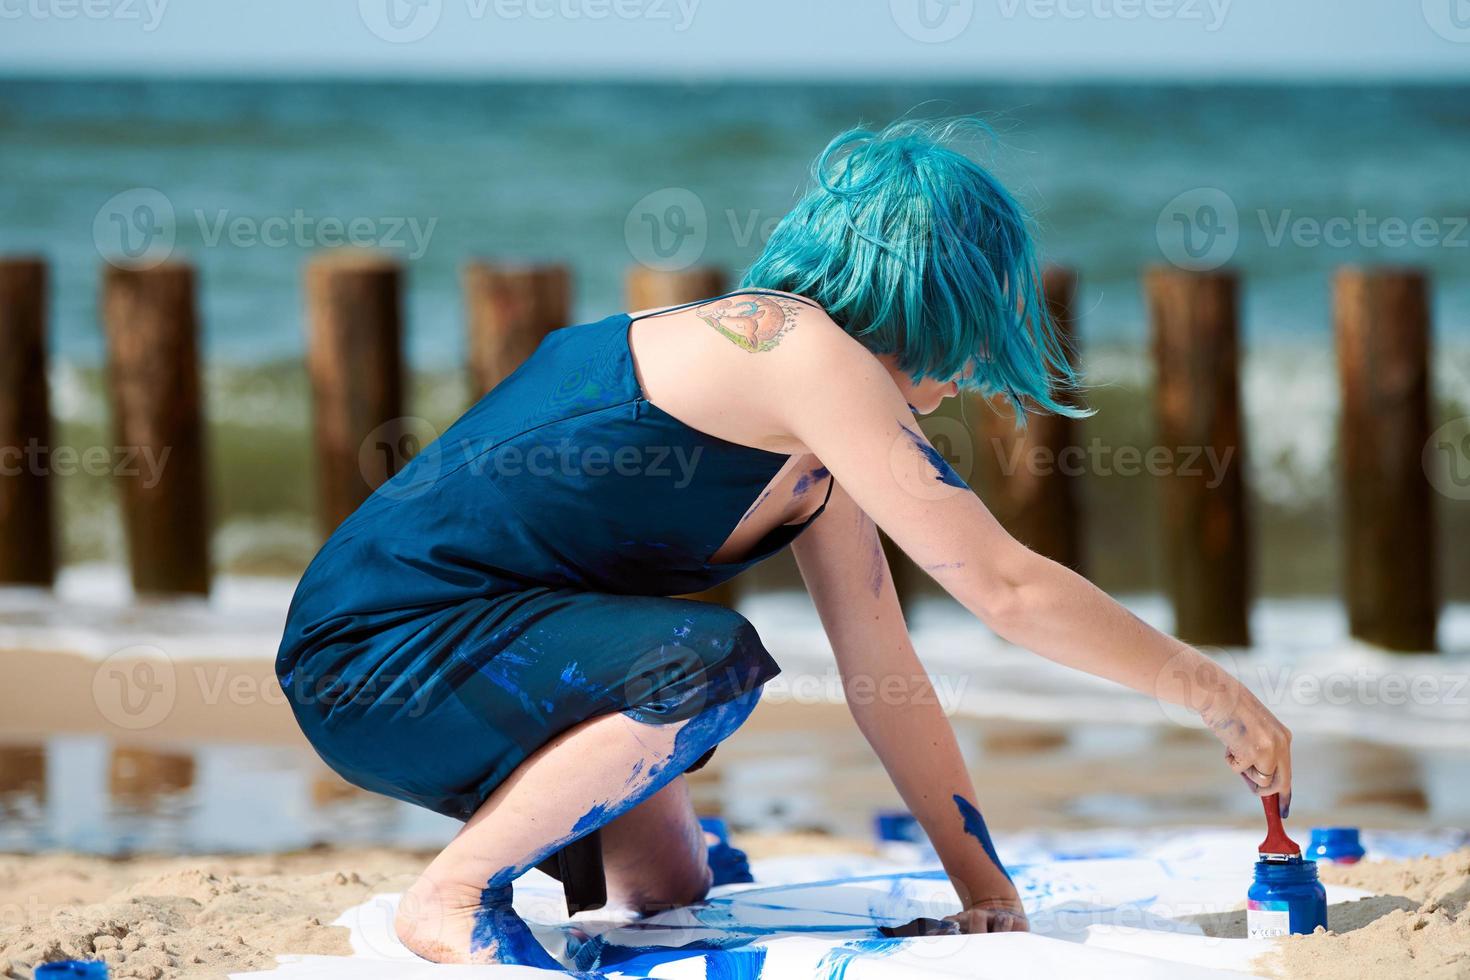 Talented blue-haired woman performance artist smeared with gouache paints on large canvas on beach photo